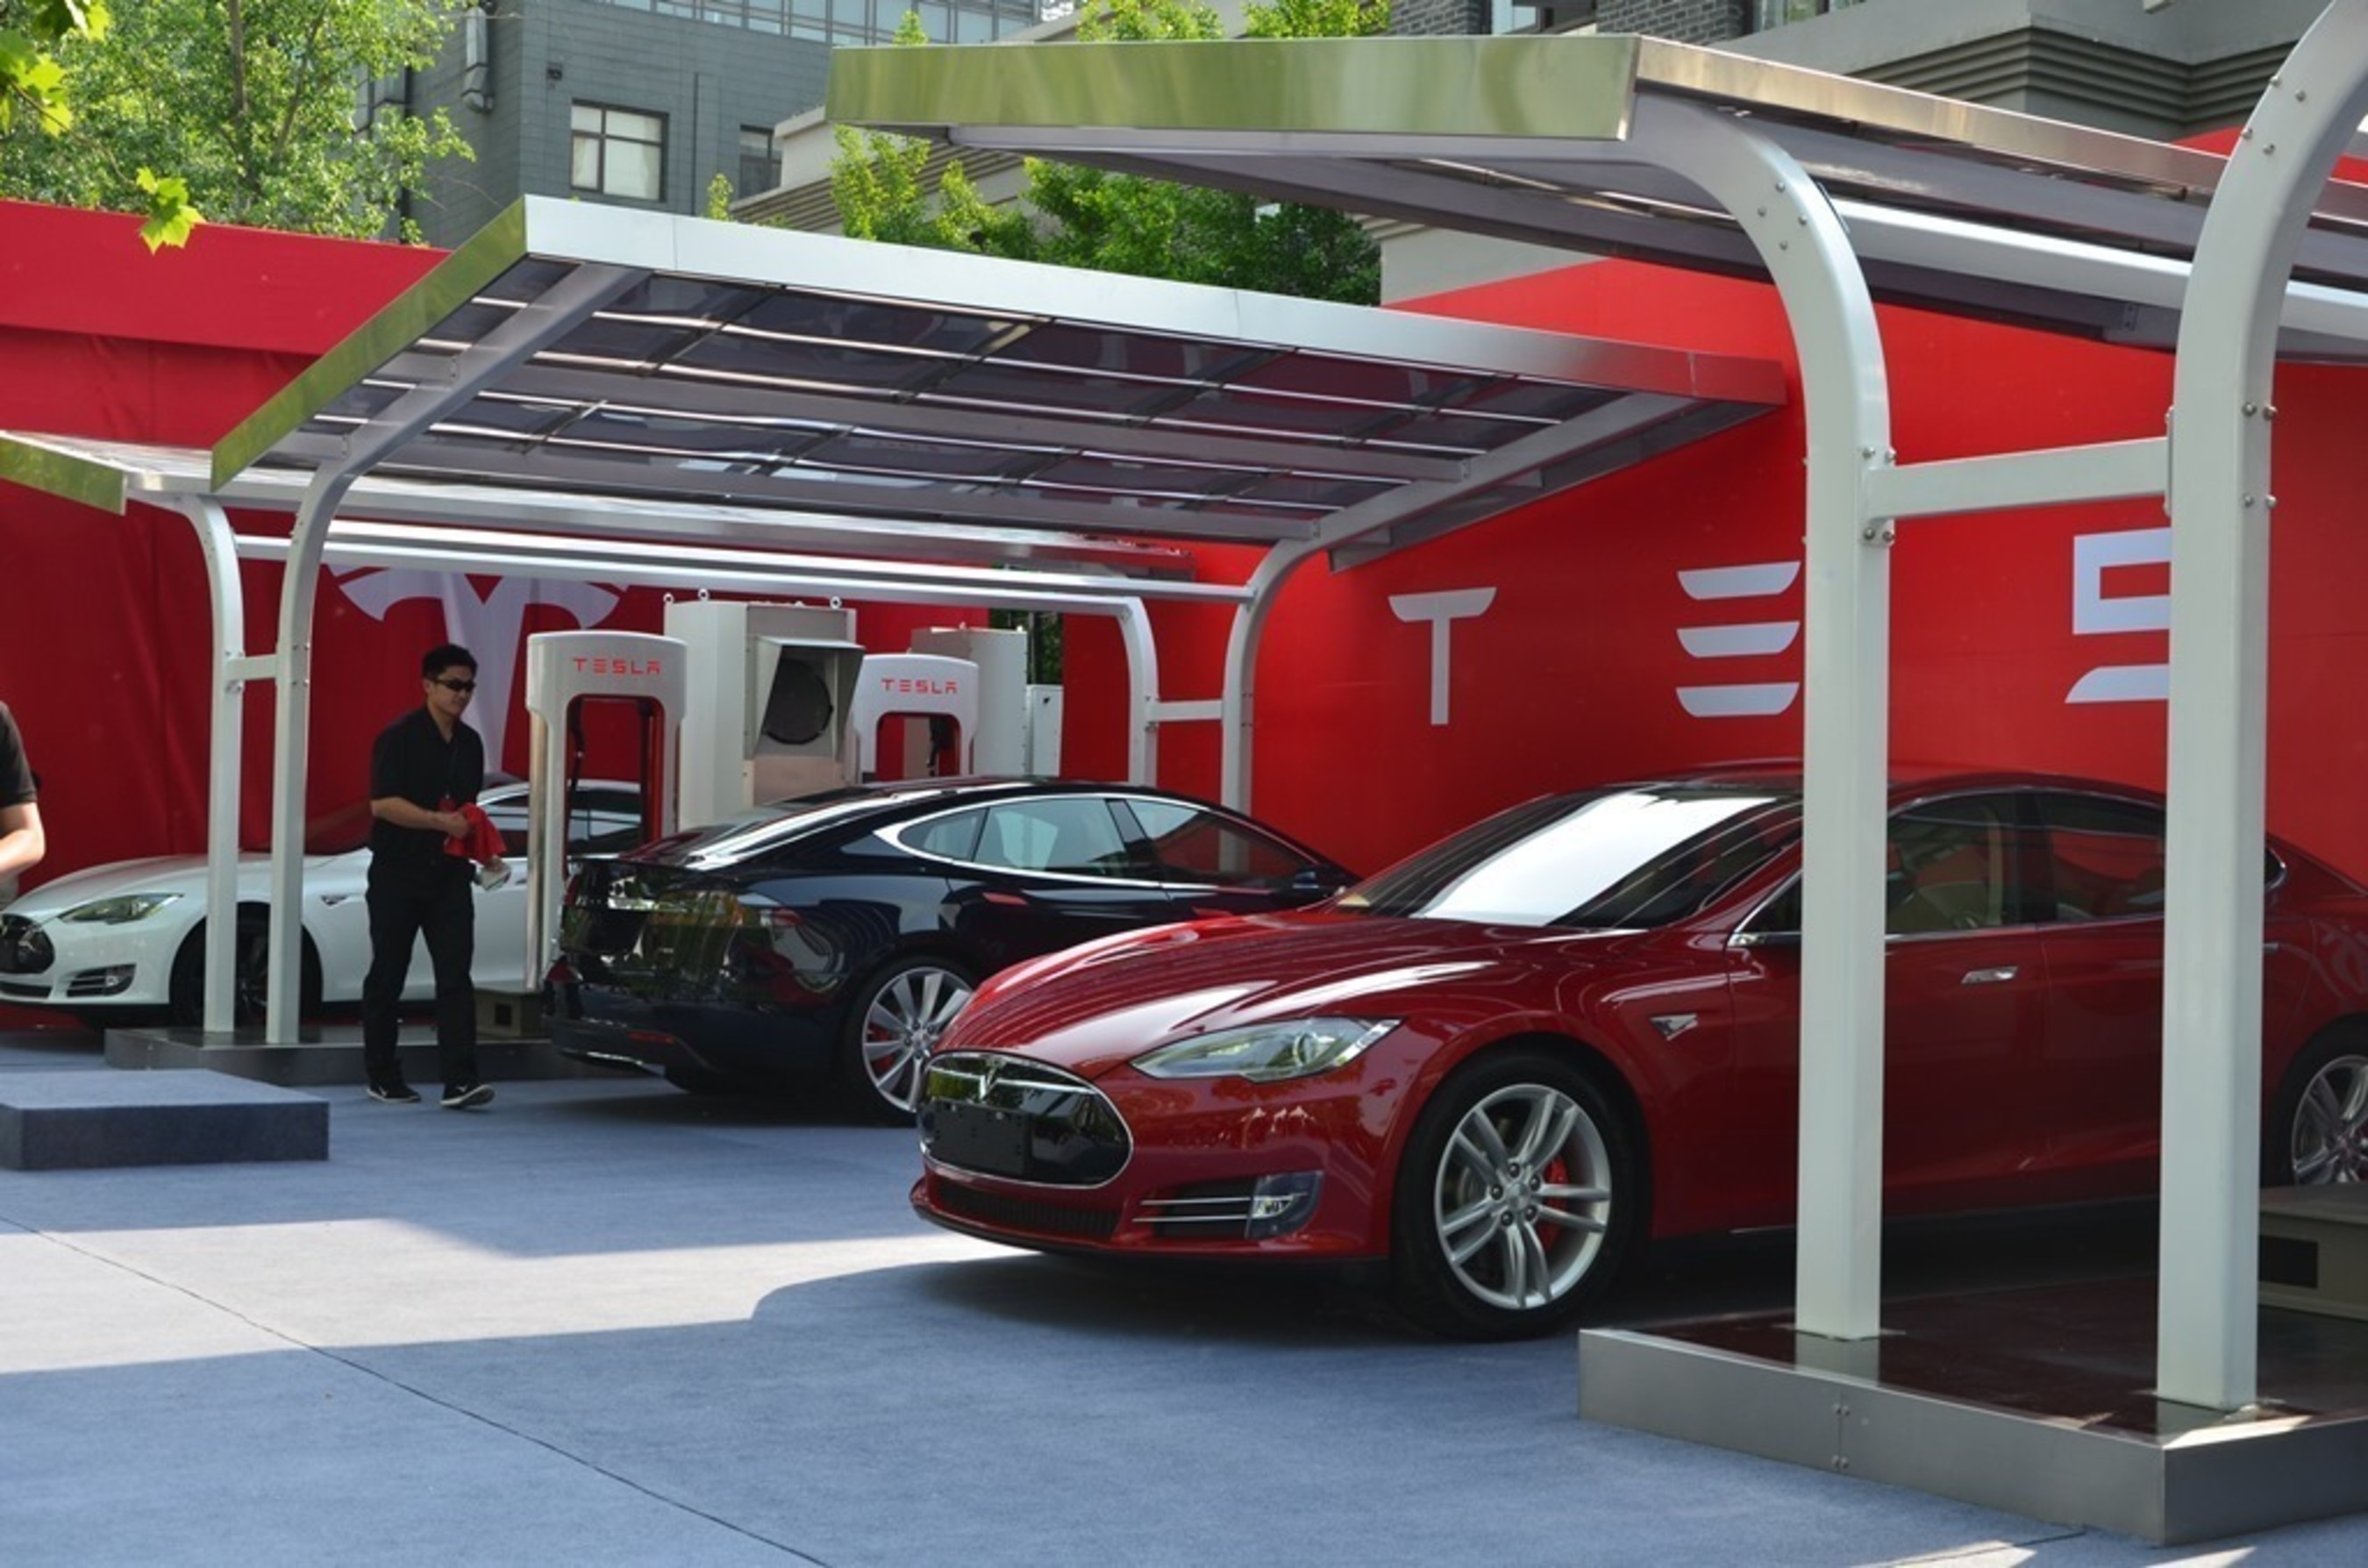 The PV charging systems was requested by Tesla Motors, and designed and manufactured by Hanergy Solar Group. (PRNewsFoto/Hanergy Solar Group)